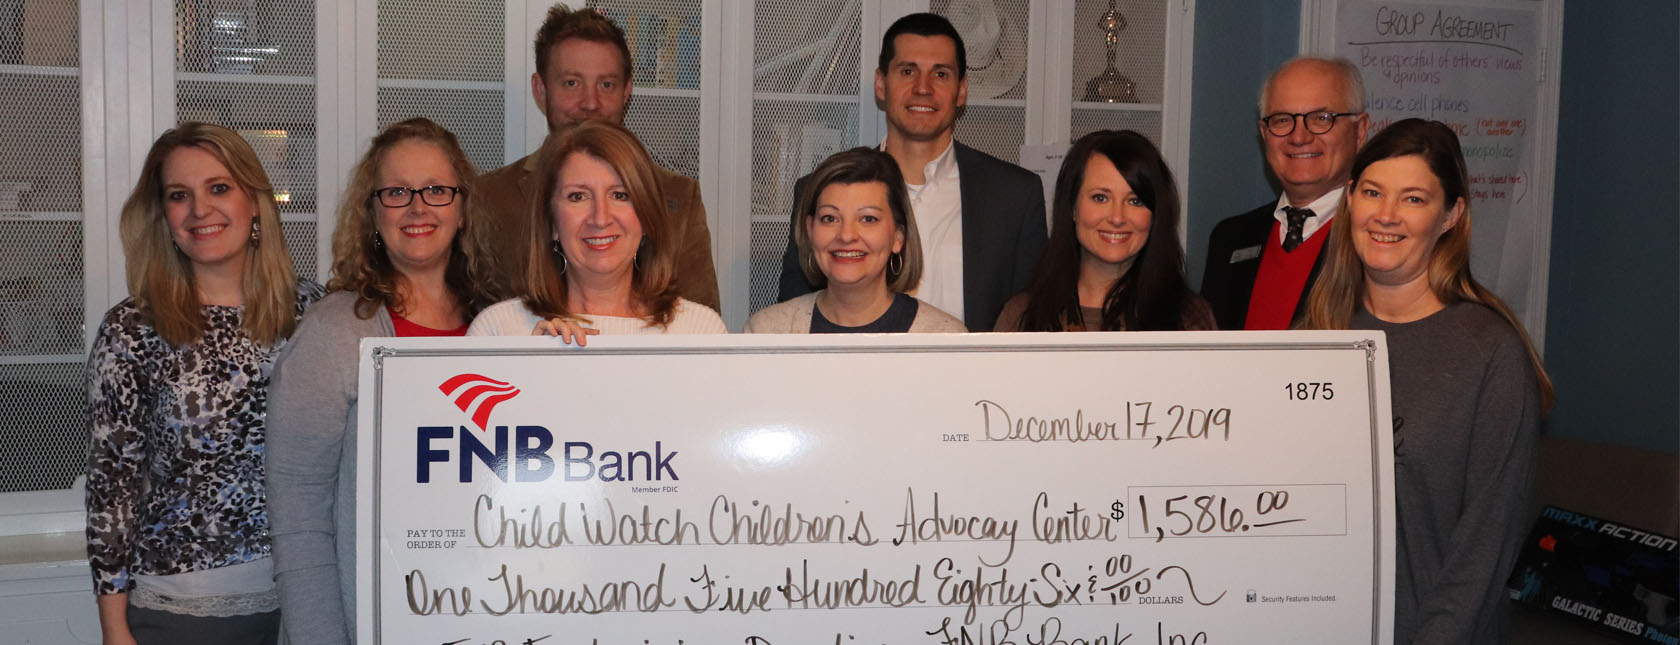 FNB Makes $2000 Donation to Paducah Child Watch